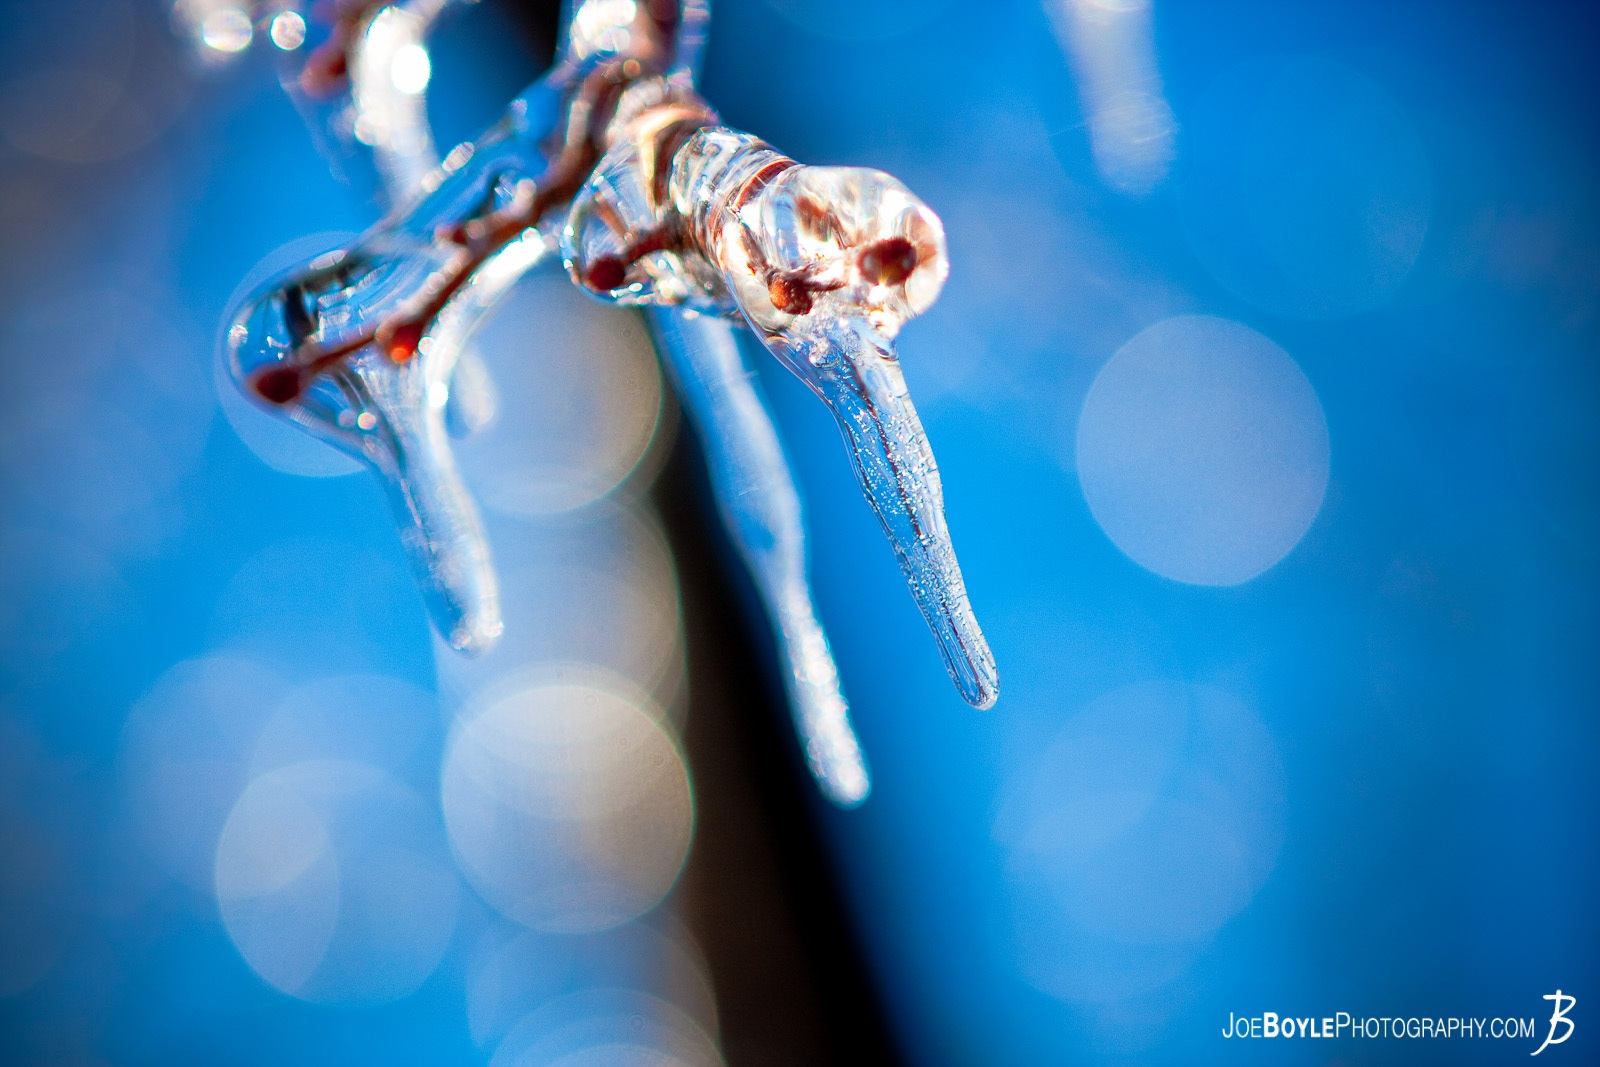  I captured this photo after an ice storm came through the Cleveland area. The storm provided some great picture opportunities that I was able to capture the following day including this icicle clinging to dear life on the tree branch! 